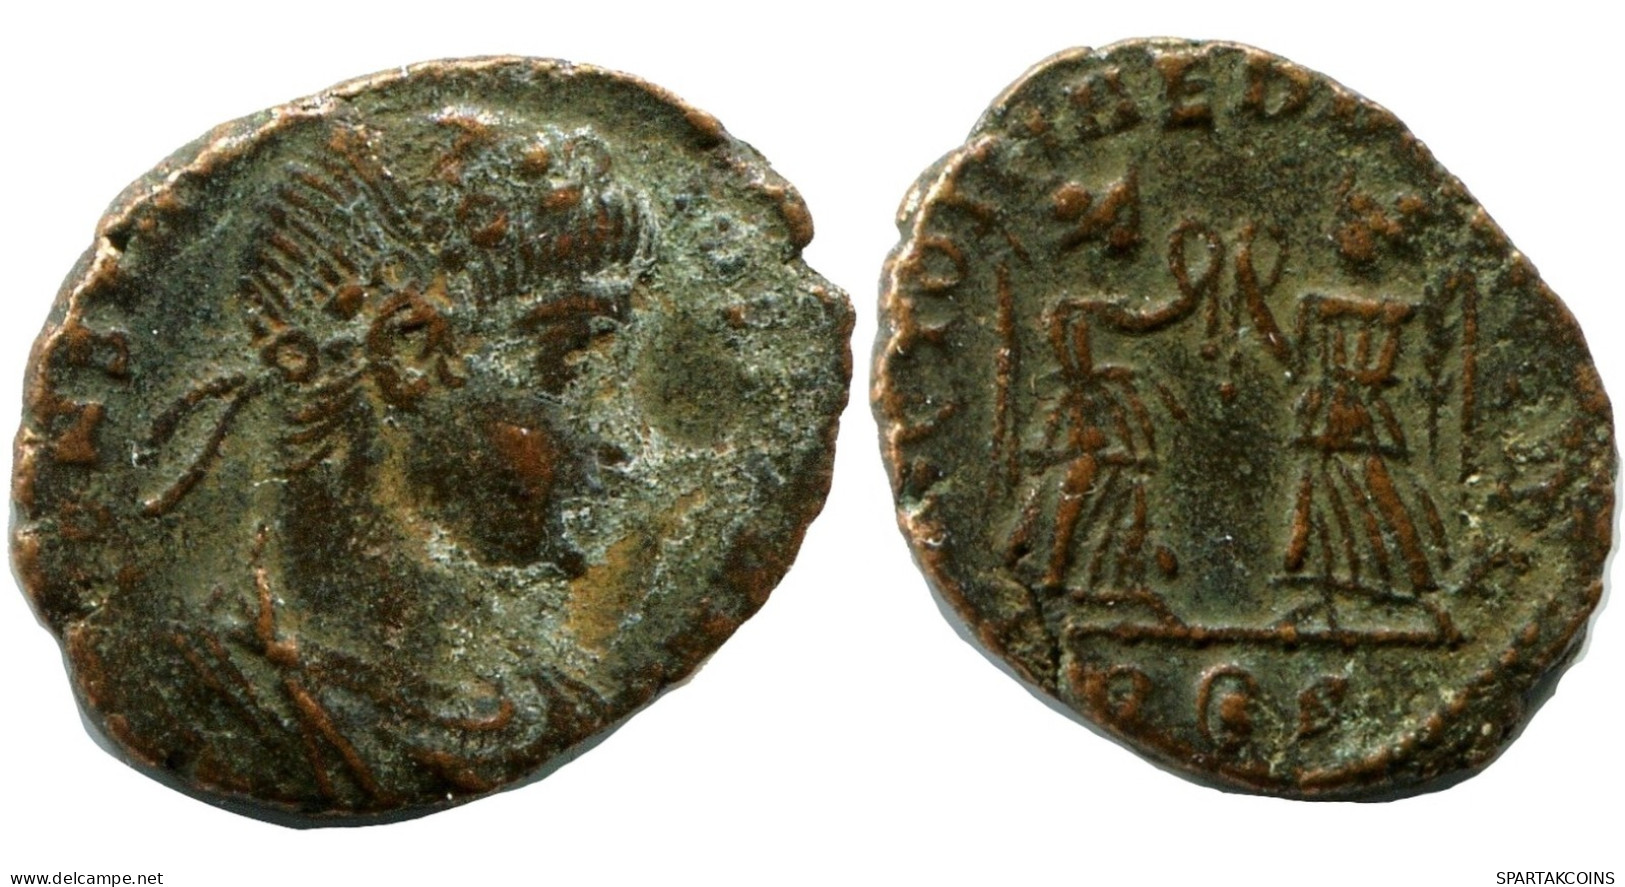 CONSTANS MINTED IN ROME ITALY FROM THE ROYAL ONTARIO MUSEUM #ANC11543.14.F.A - El Imperio Christiano (307 / 363)